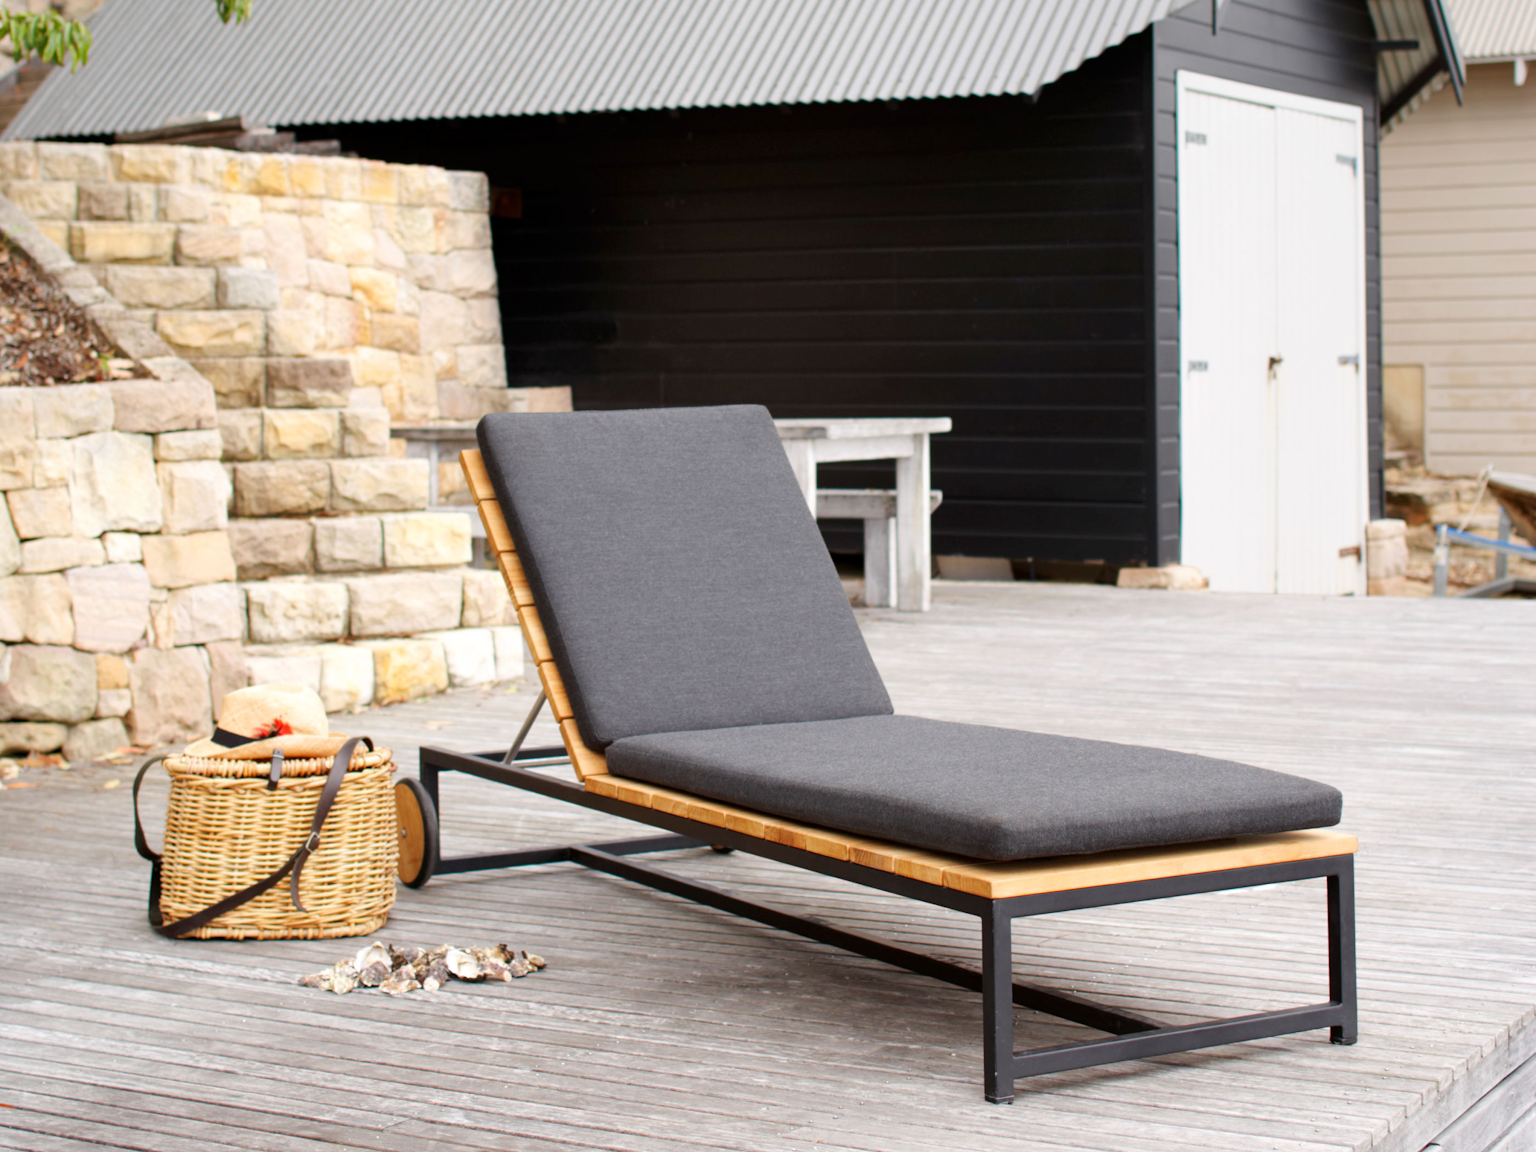 Nullica daybed with cushion in Basics outdoor fabric on wooden deck